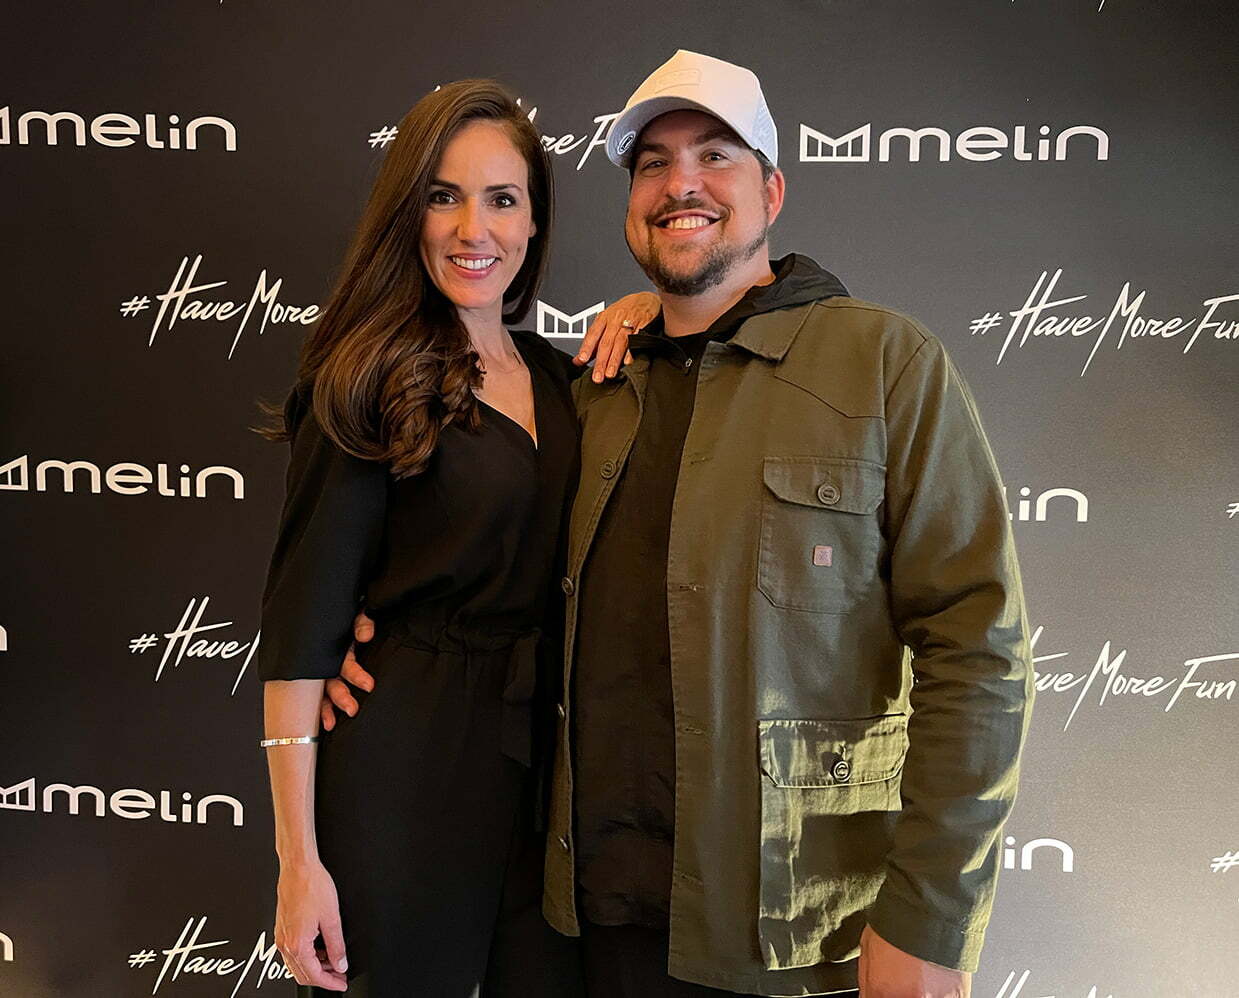 Melin co-founder Corey Roth and his spouse Megan at the grand opening party in Laguna Beach, California.  (Julie Chung/SNAP TASTE)